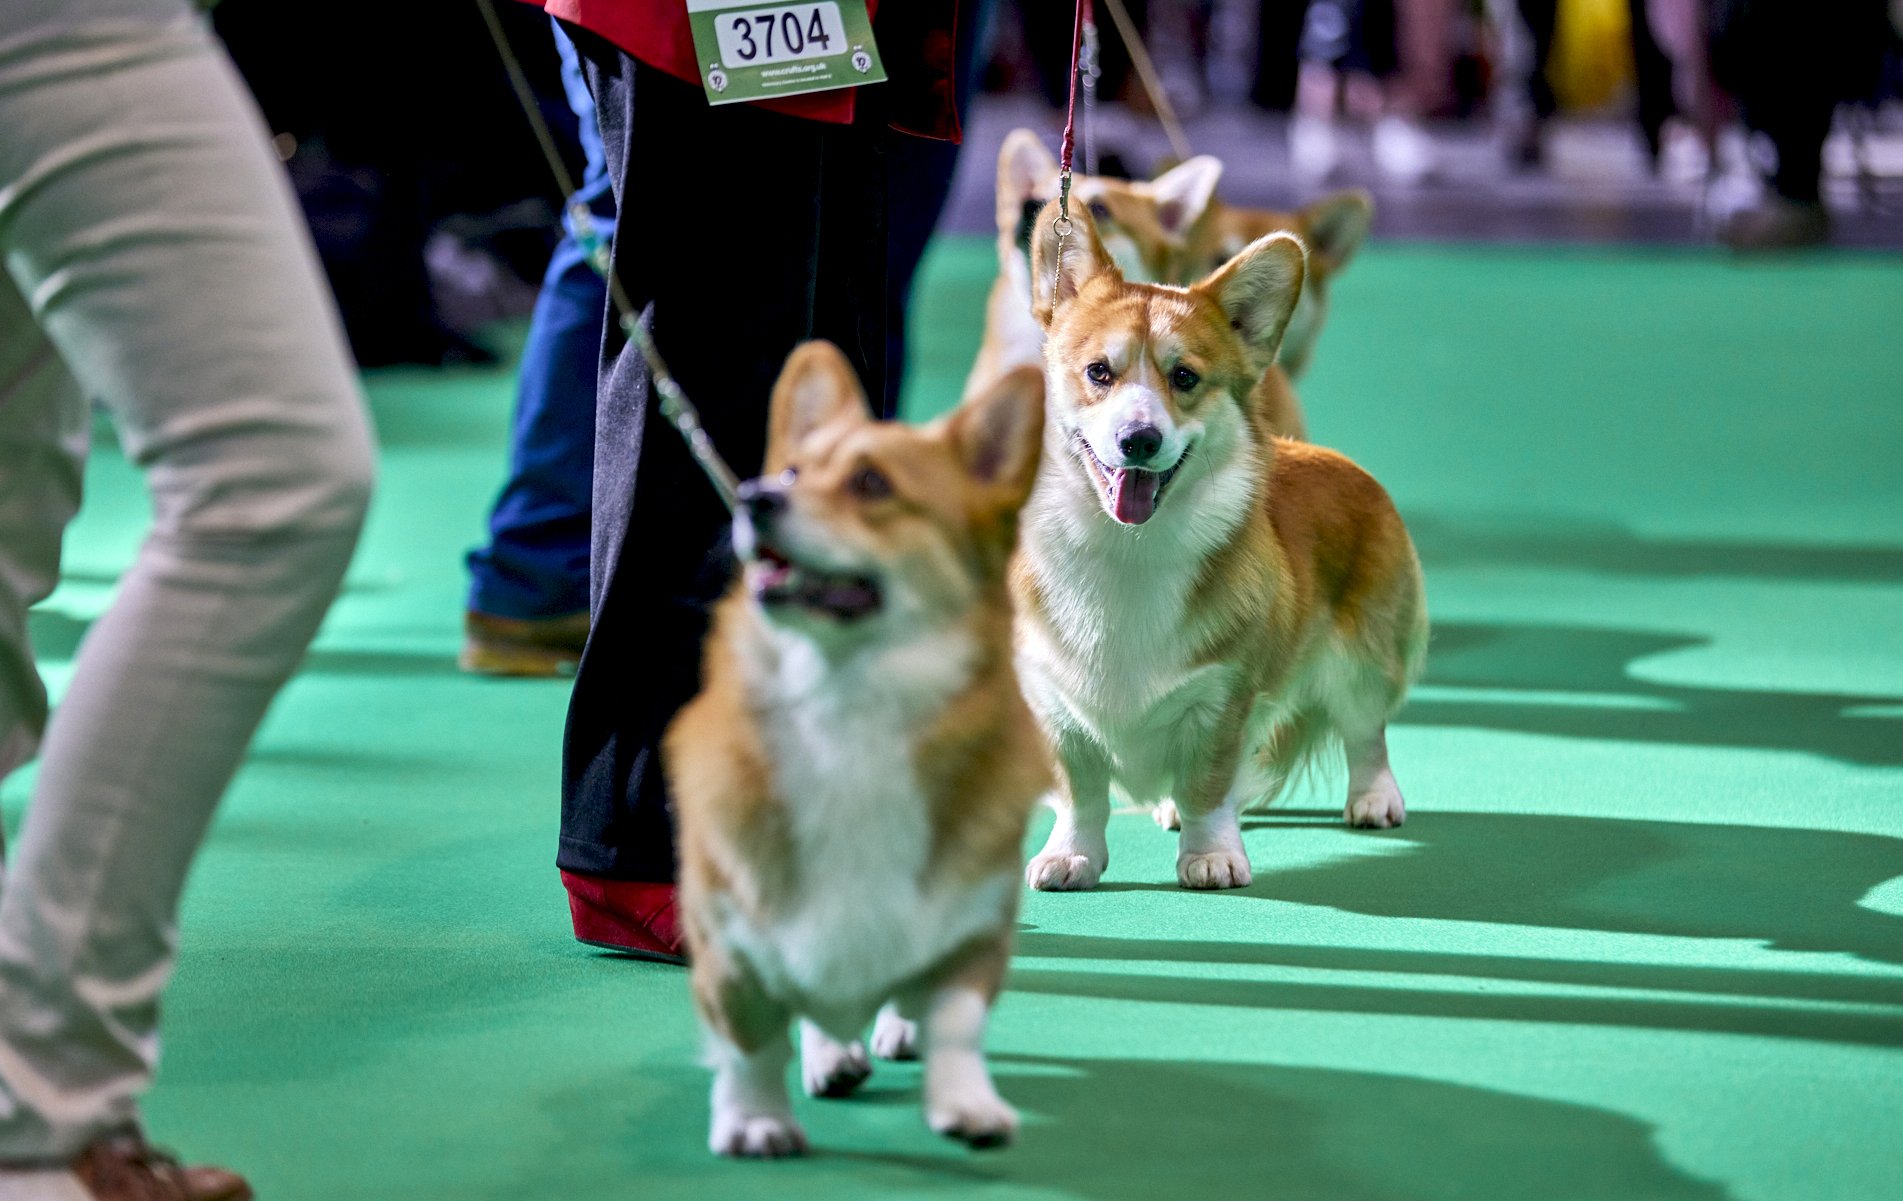  {dats} Copyright: Flick.digitalFree for editorial use image, please credit: Dave Phillips/ Flick.digitalWelsh Corgi at Crufts 2022 at the NEC in Birmingham today.The world’s greatest dog show, Crufts, is taking place from 10th – 13th March at the NE